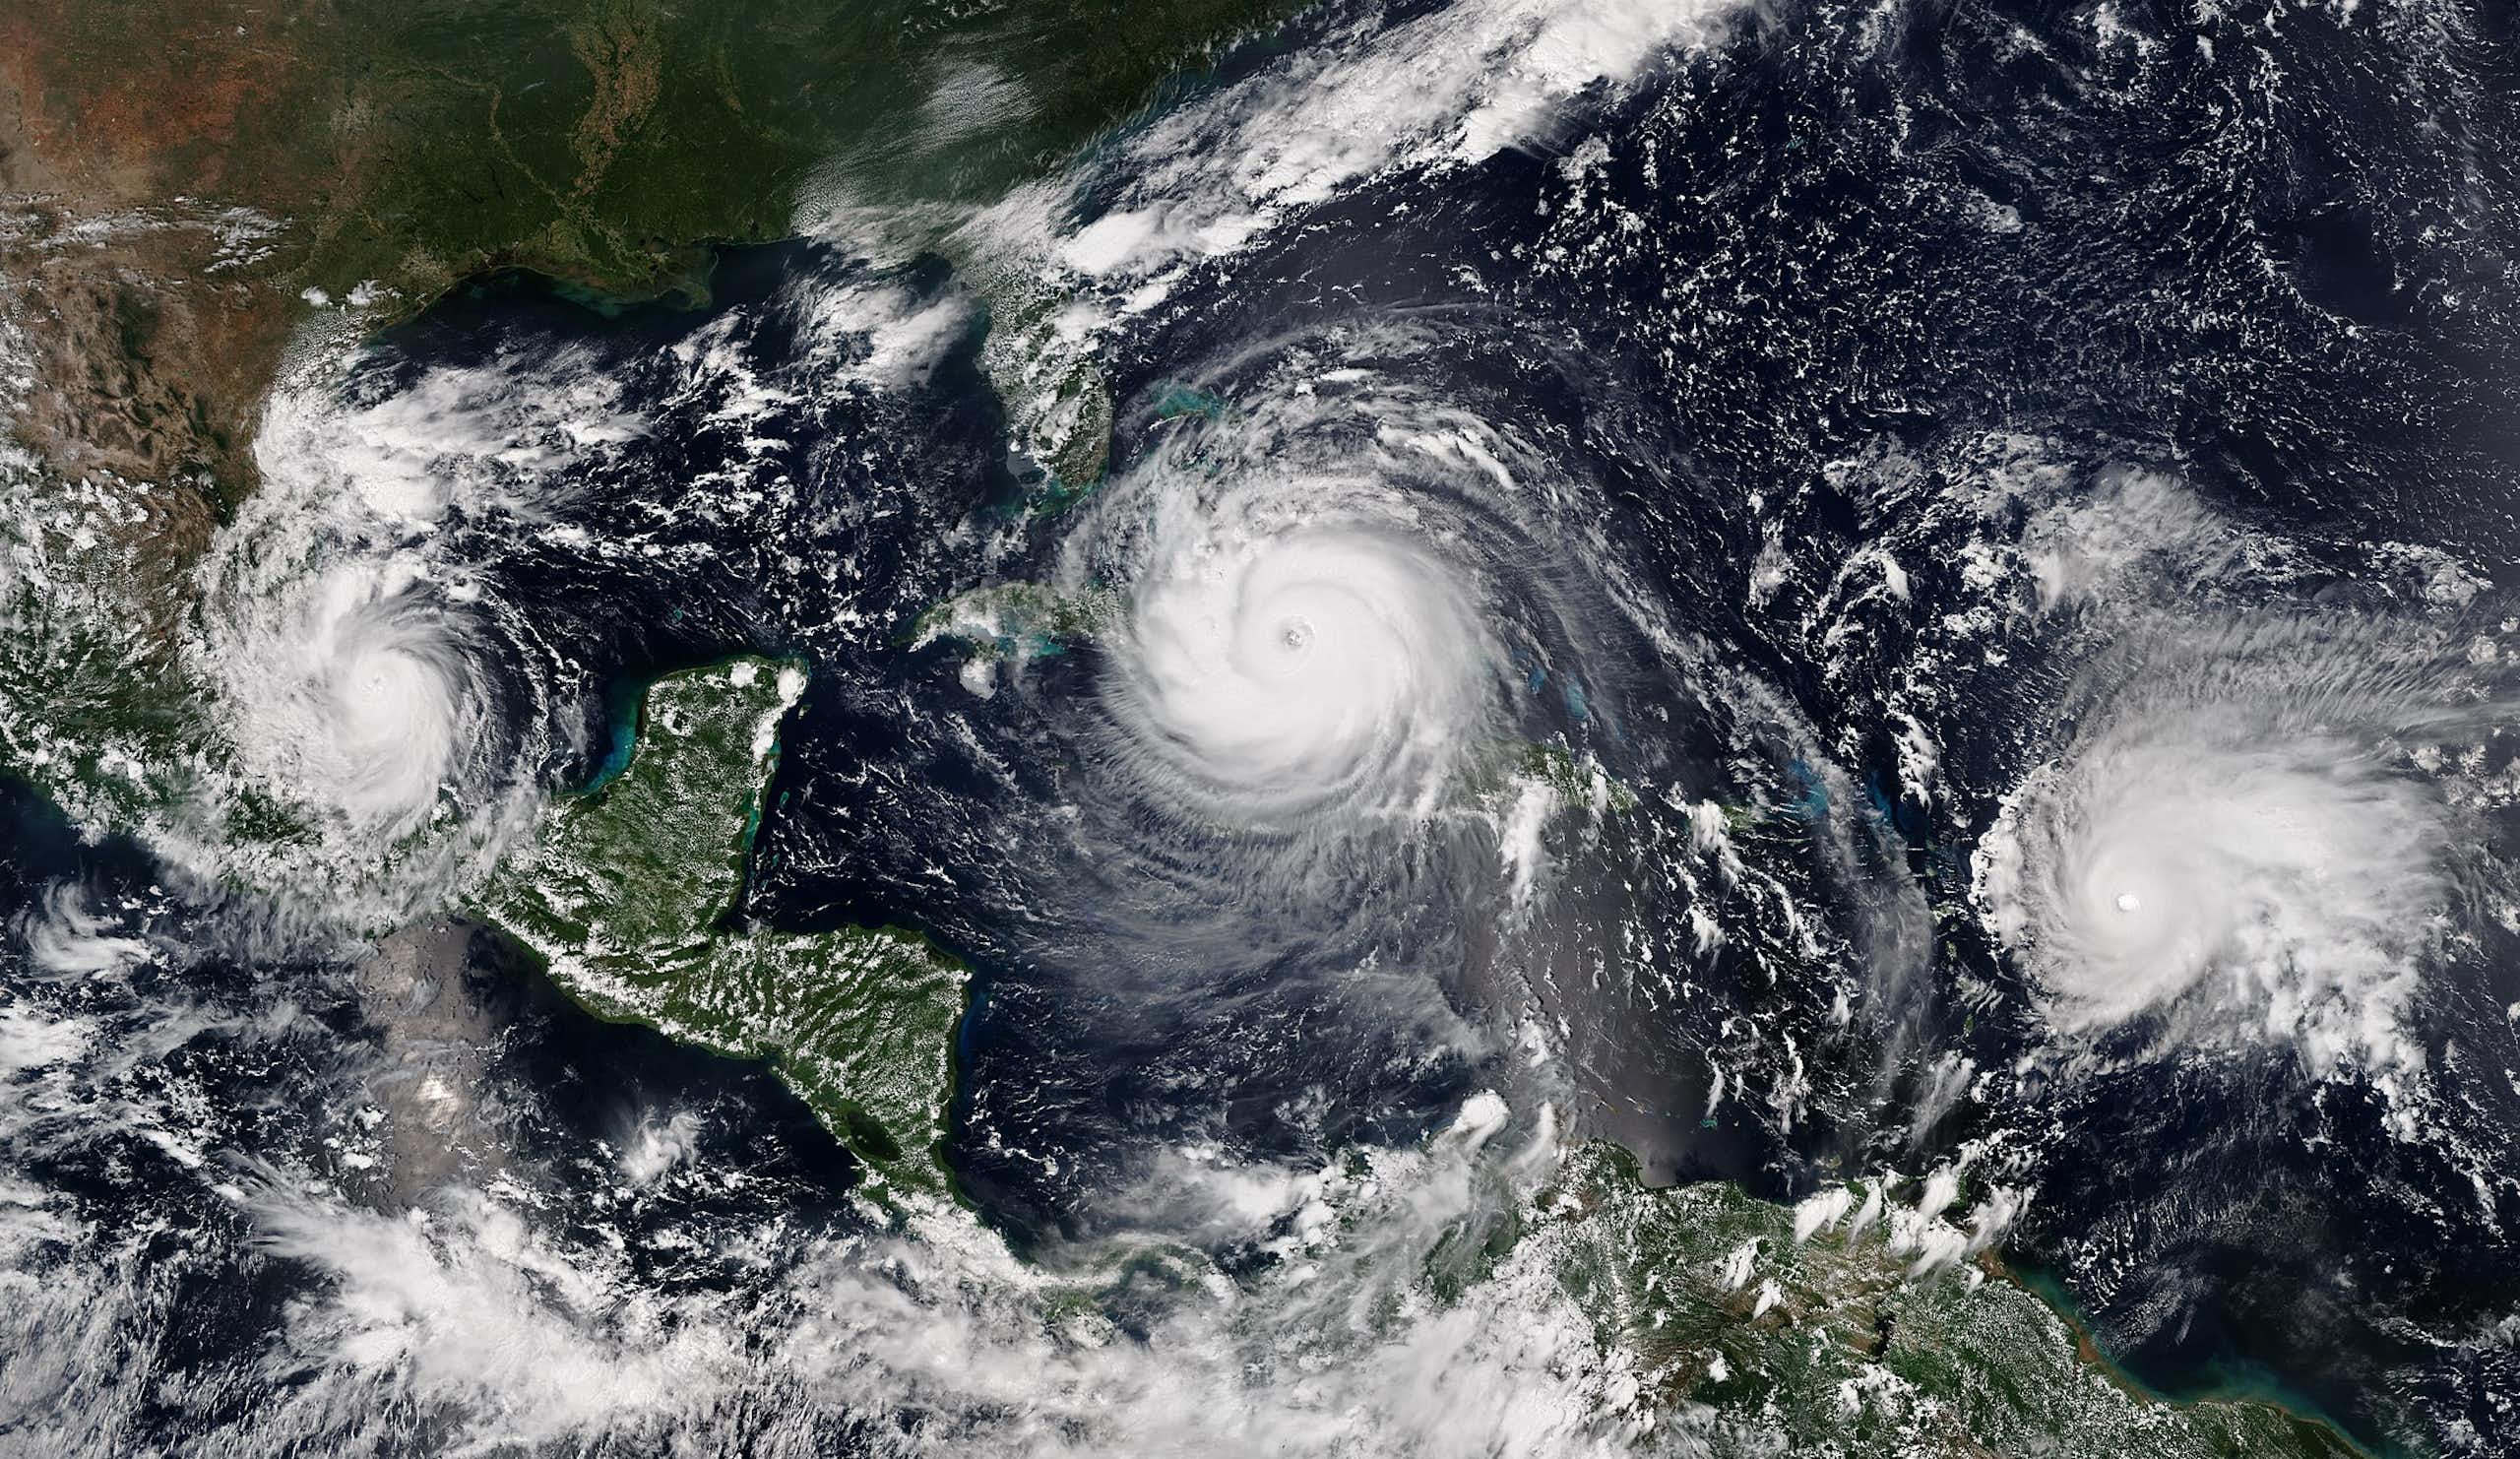 Image of three hurricanes in a row, captured by NOAA's Suomi satellite on Sept. 8, 2017.